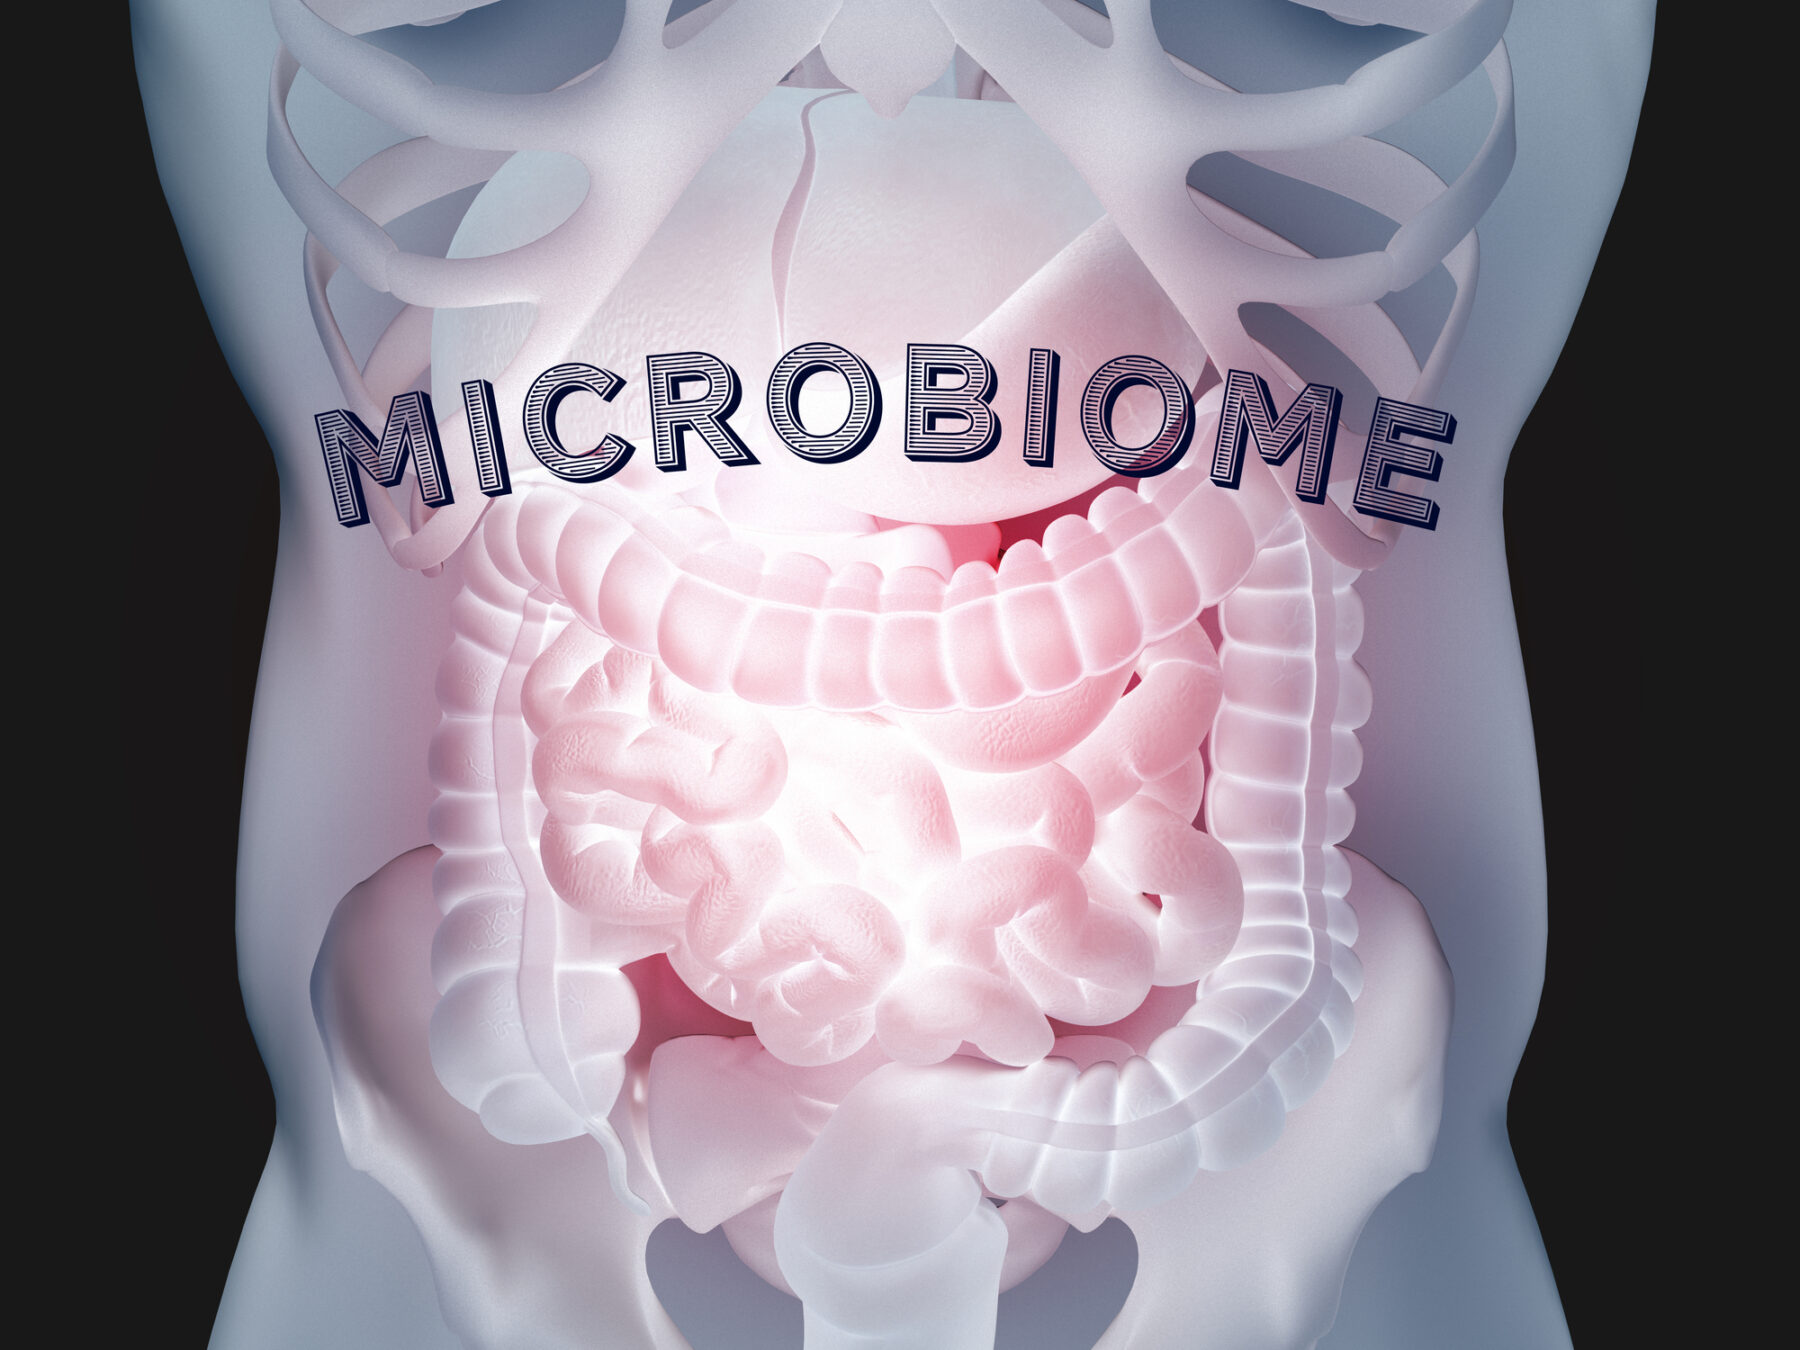 Model of the Human digestive system with the word Microbiome superimposed